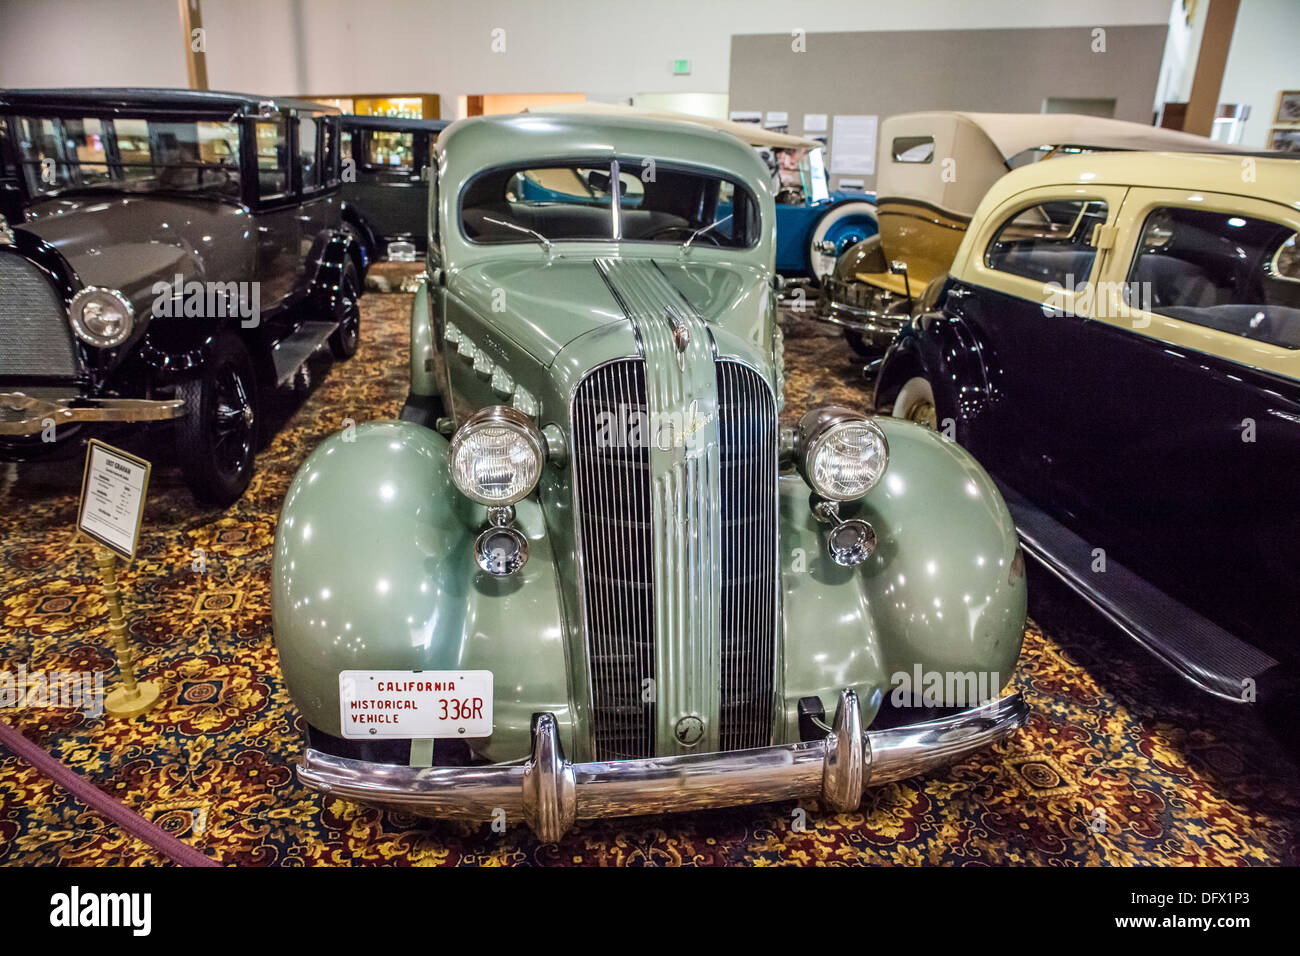 A 1937 Graham at the Nethercutt Museum in Sylmar California Stock Photo